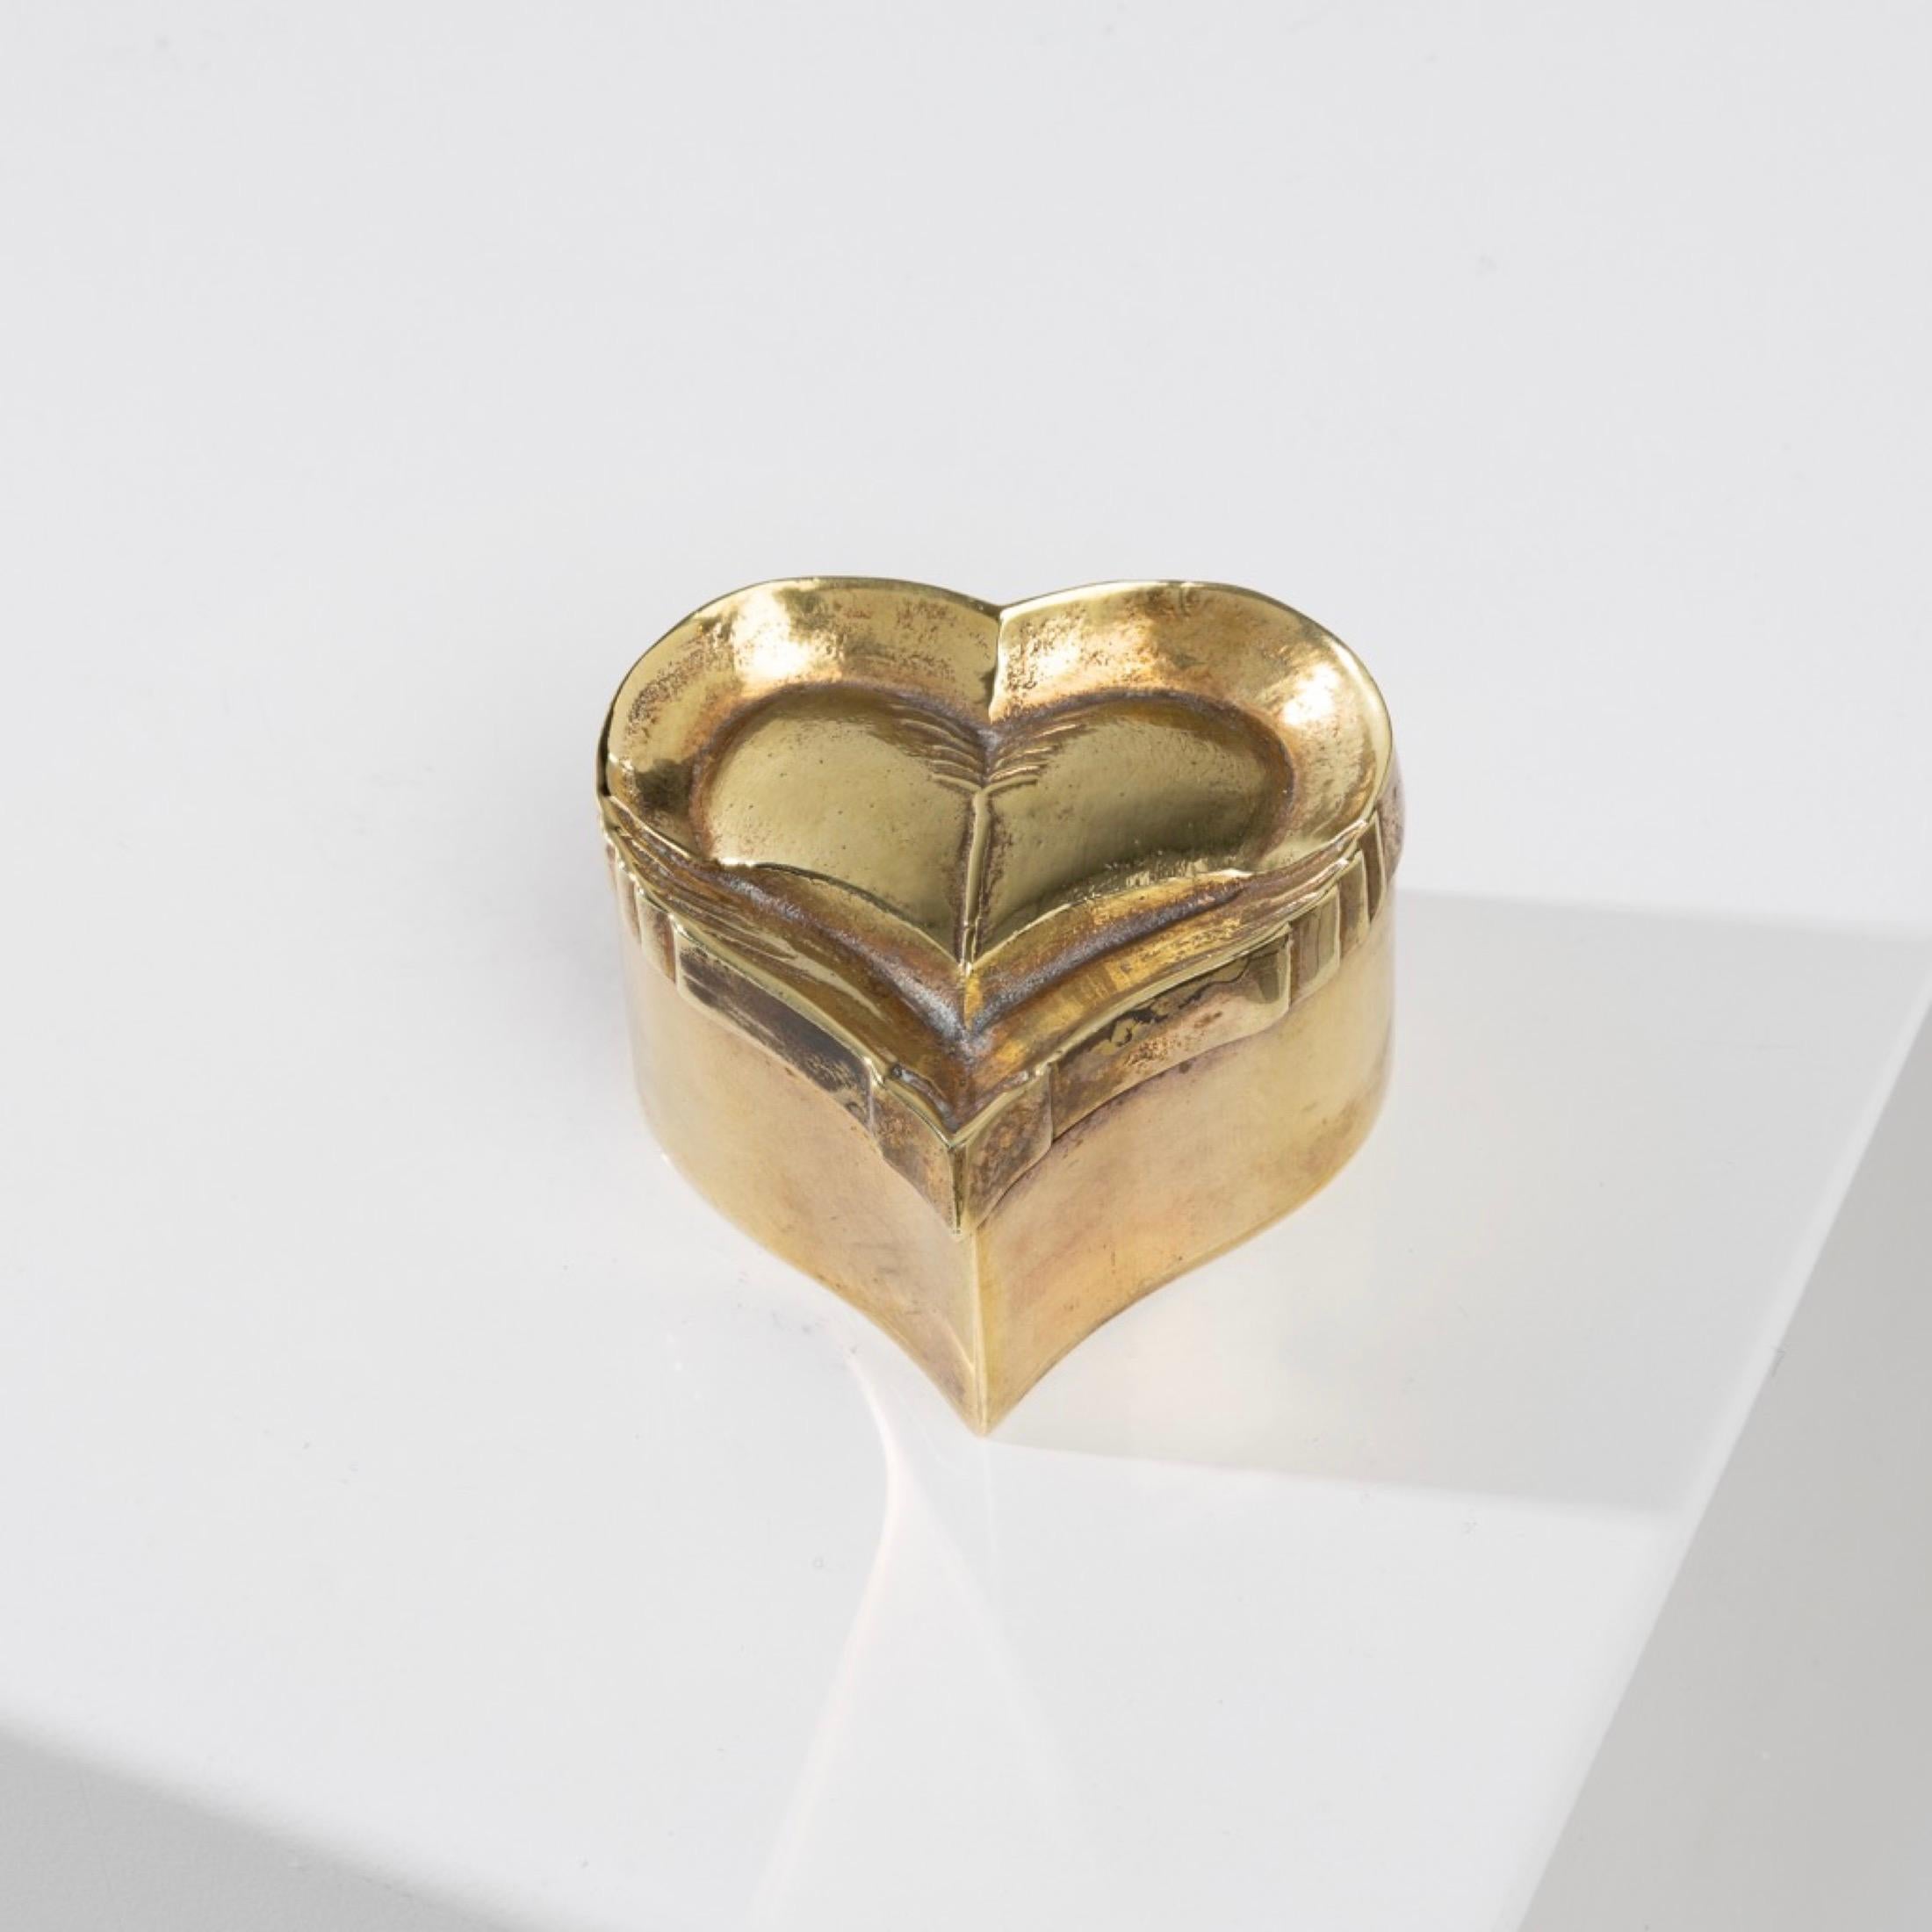 French Le Coeur 'the Heart' by Line Vautrin, Gilt Bronze Box